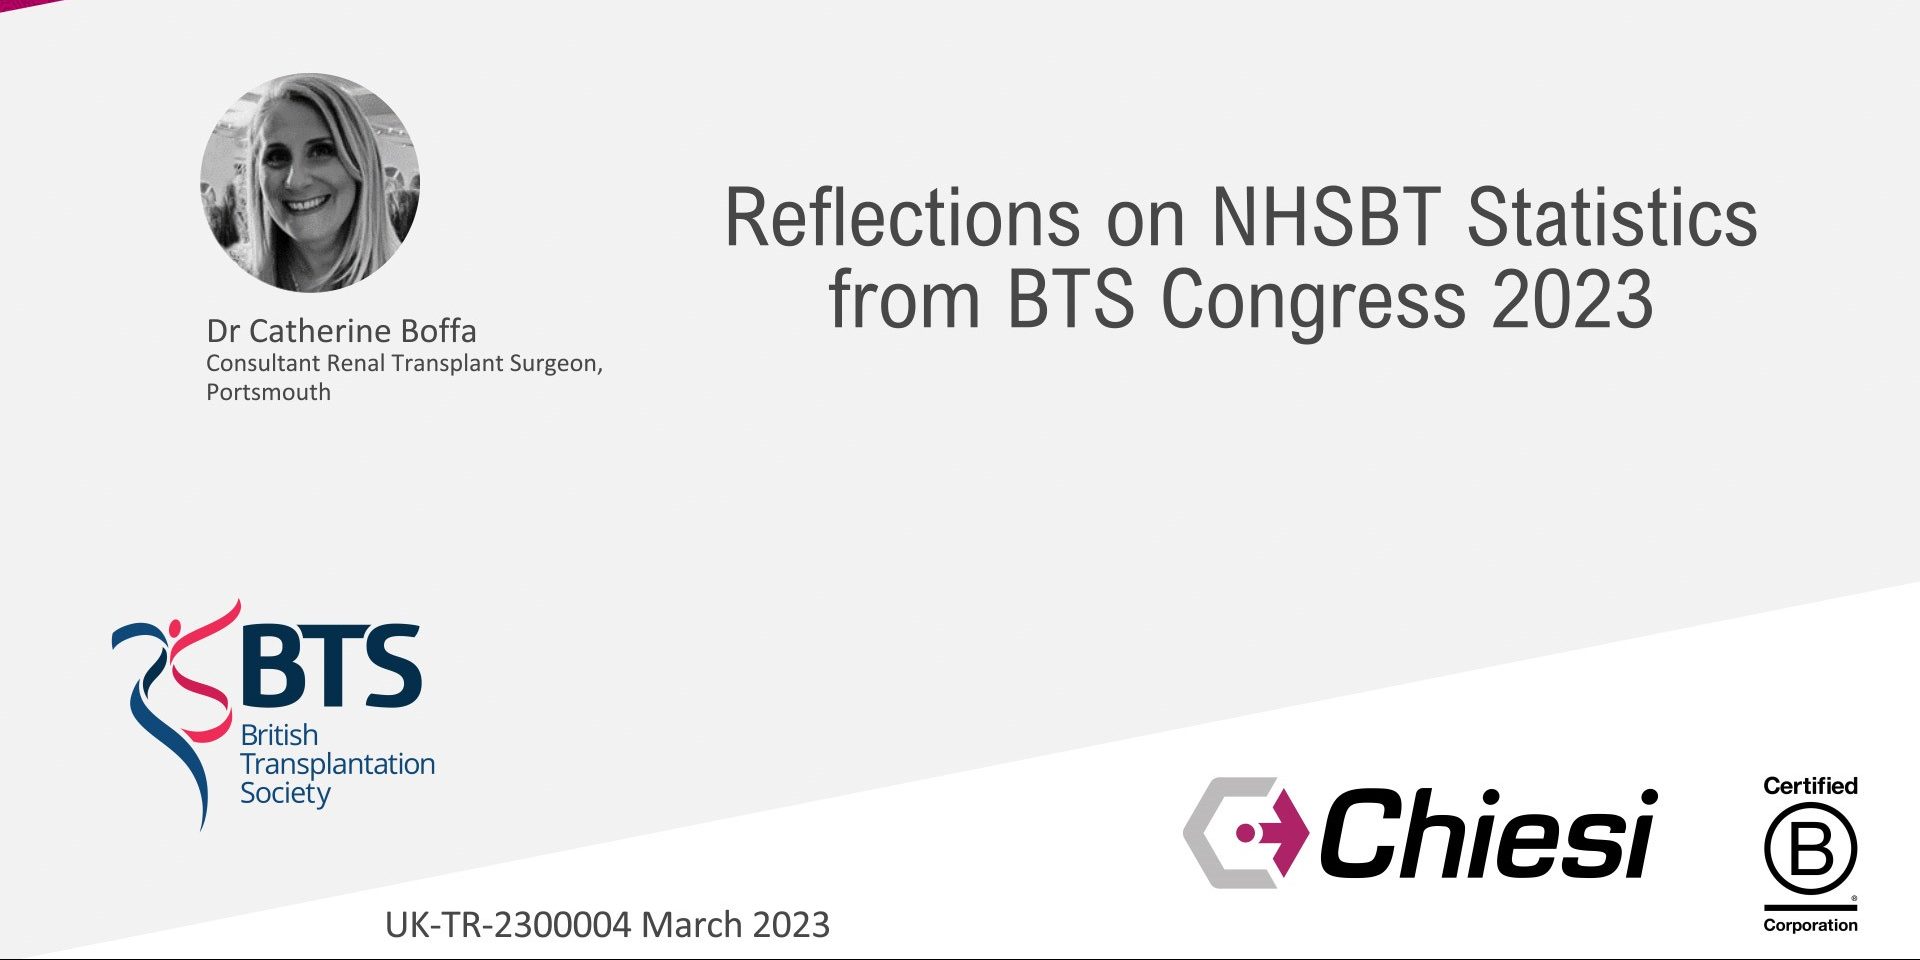 Reflections on NHSBT Statistics from BTS Congress 2023